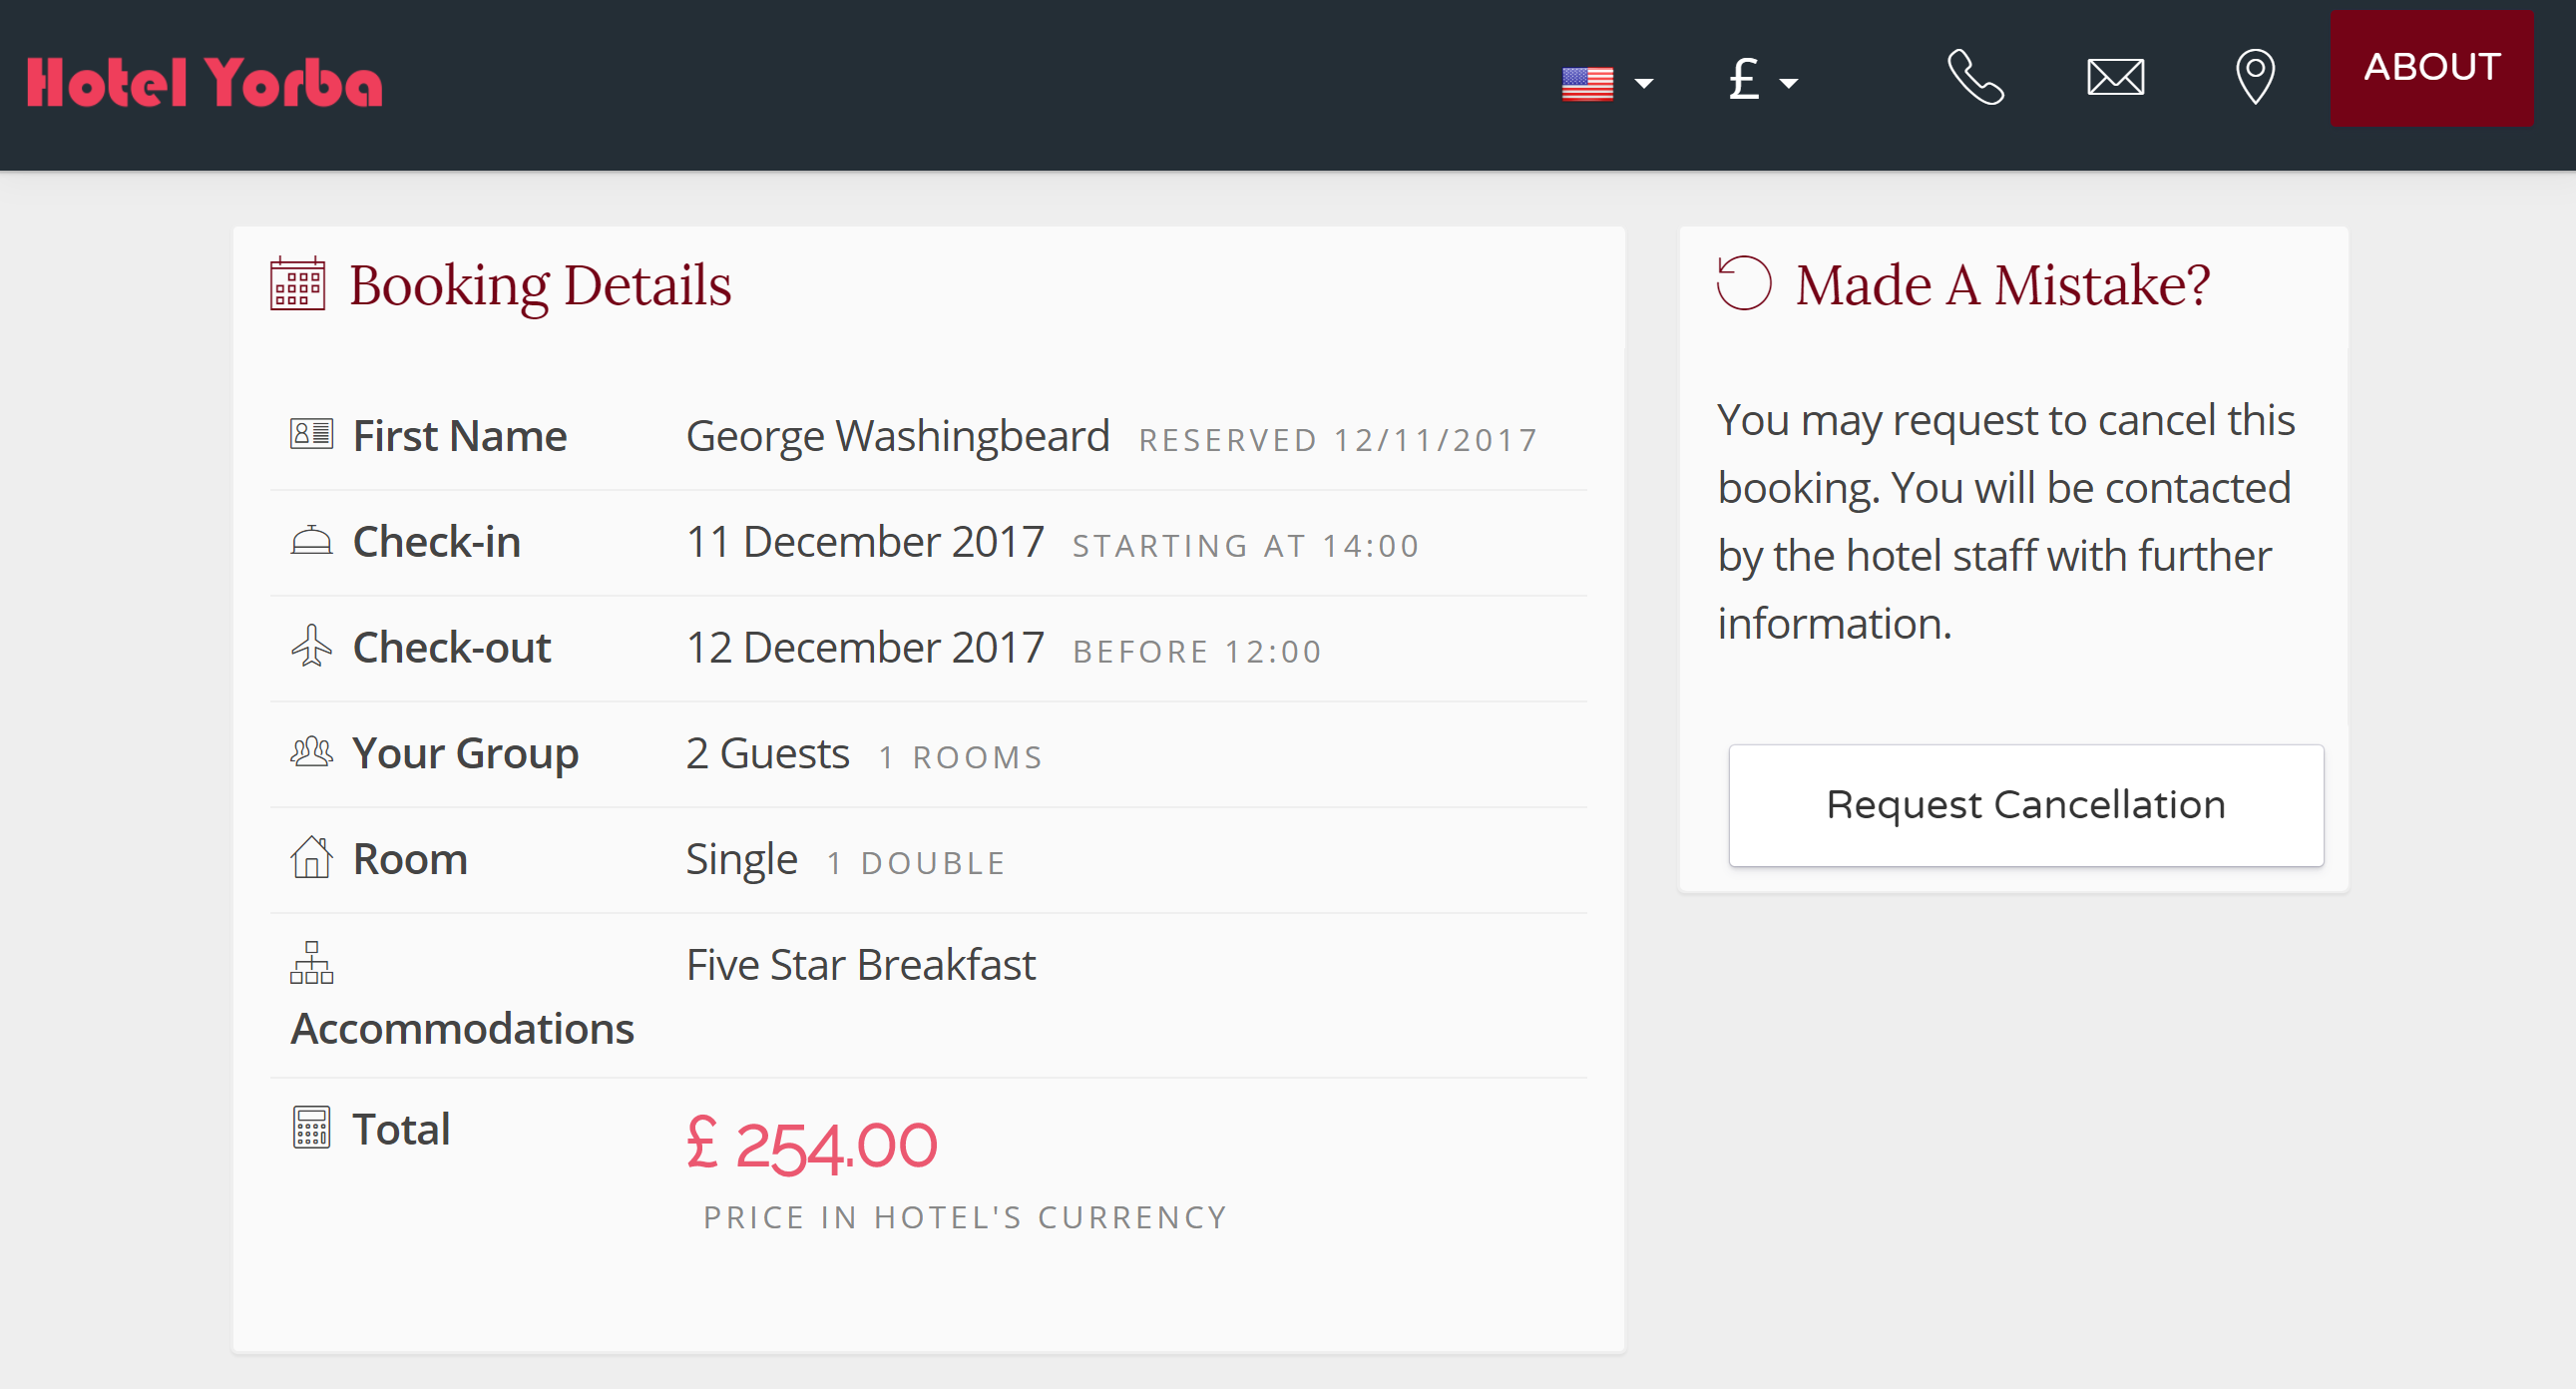 Here you see the electronic invoice available to your guests, and you should receive a confirmation email. You guests can access your room service menu, messaging, and review services from this page once they check-in/out. More on this in Section IV.